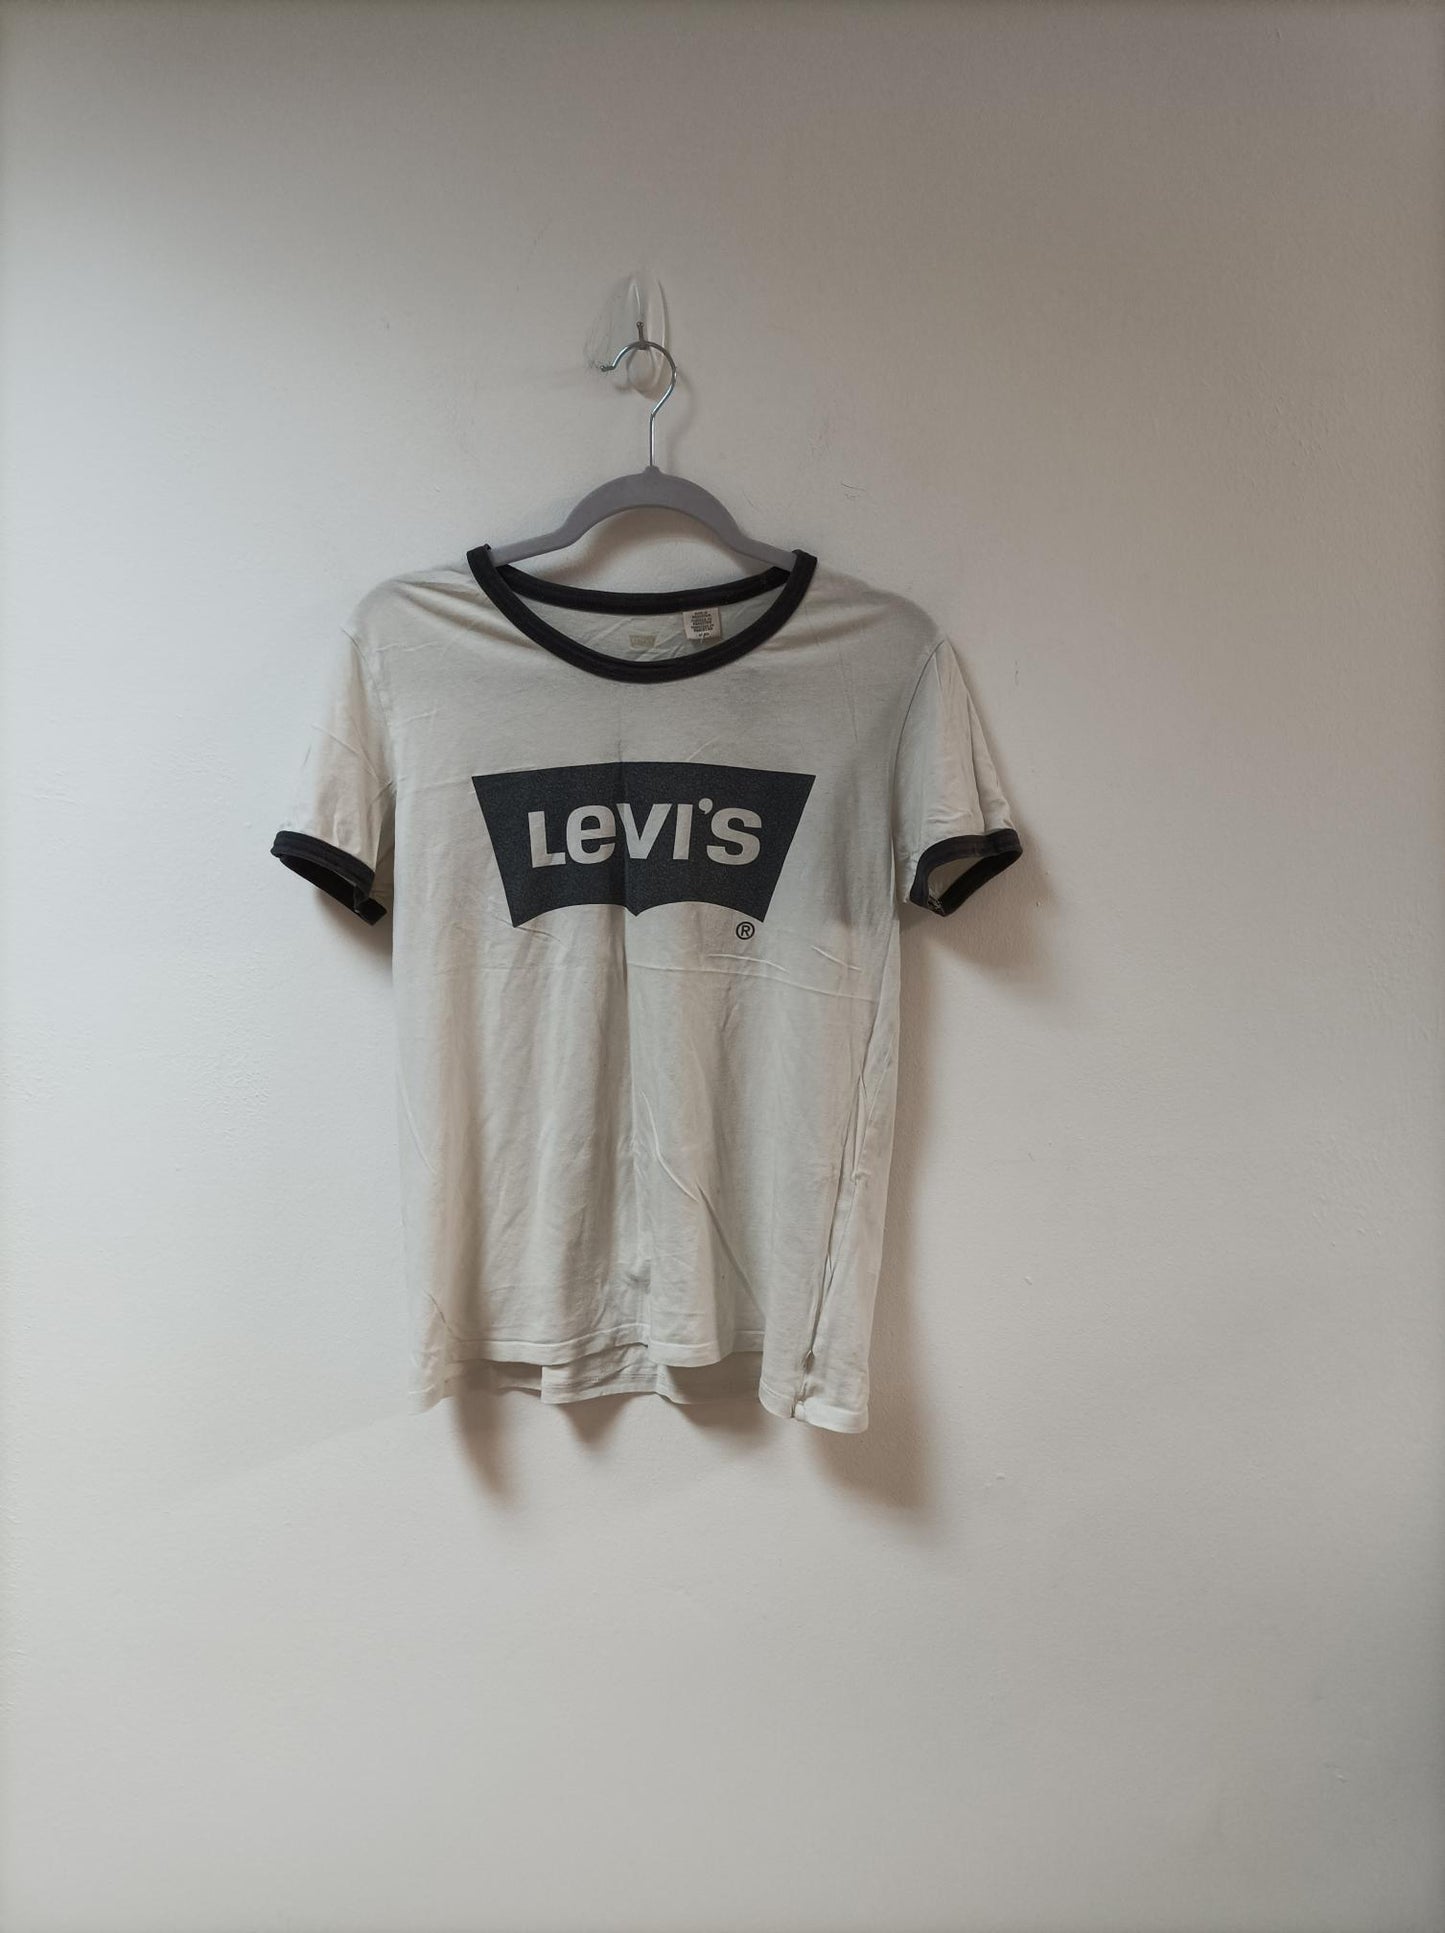 White and grey Levi's branded t-shirt, Levi's, size S- Damaged Item Sale